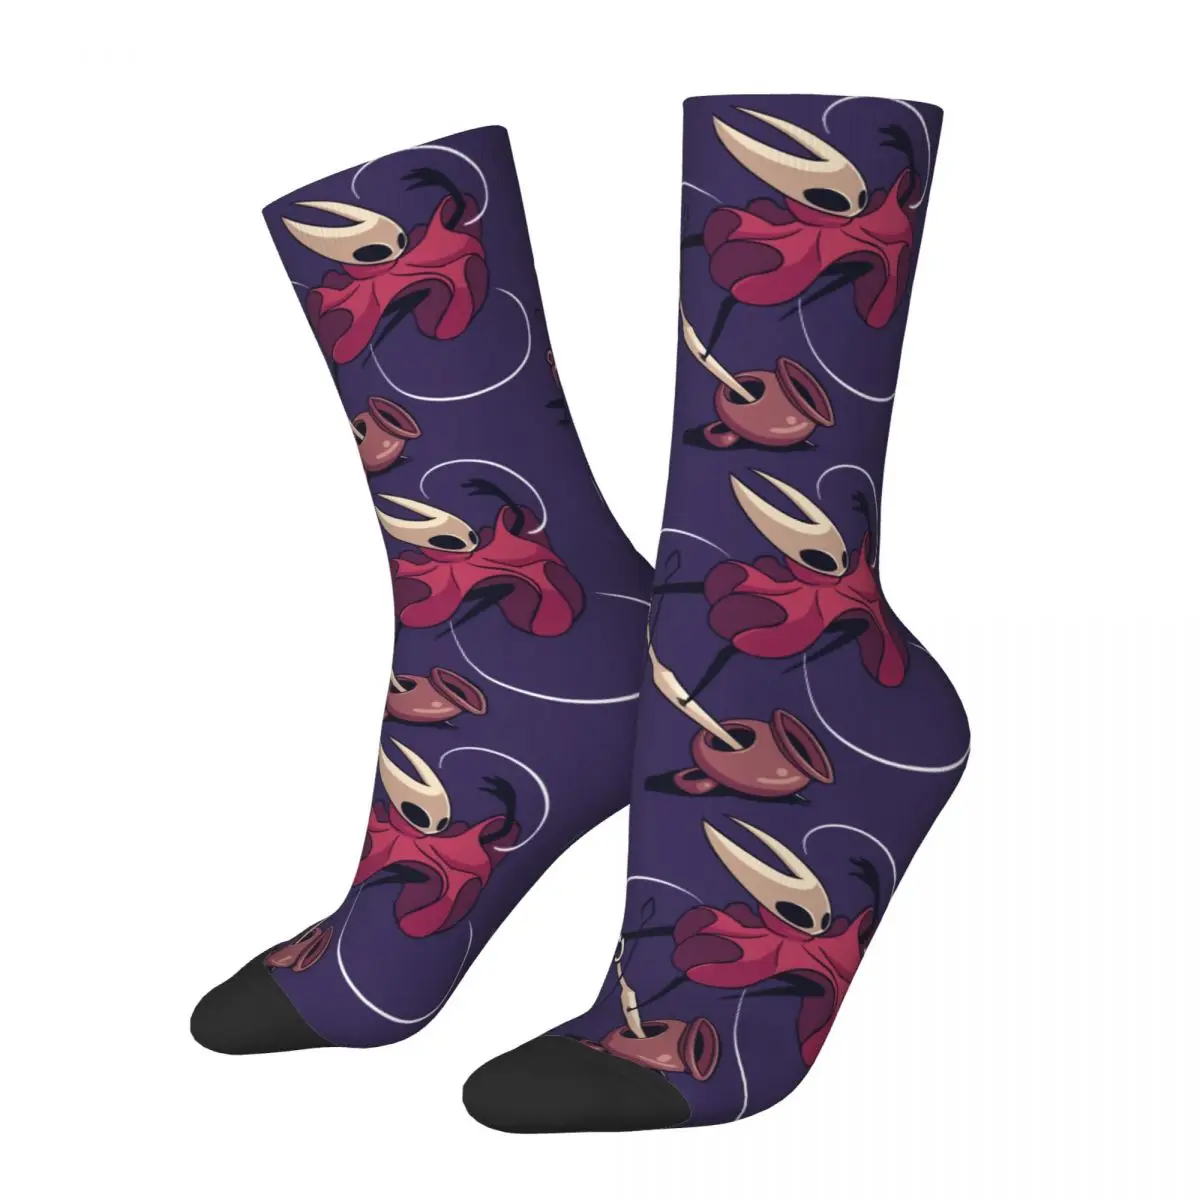 

Hip Hop Vintage Hornet Cool Crazy Men's compression Socks Unisex Hollow Knight Silksong Street Style Pattern Printed Crew Sock